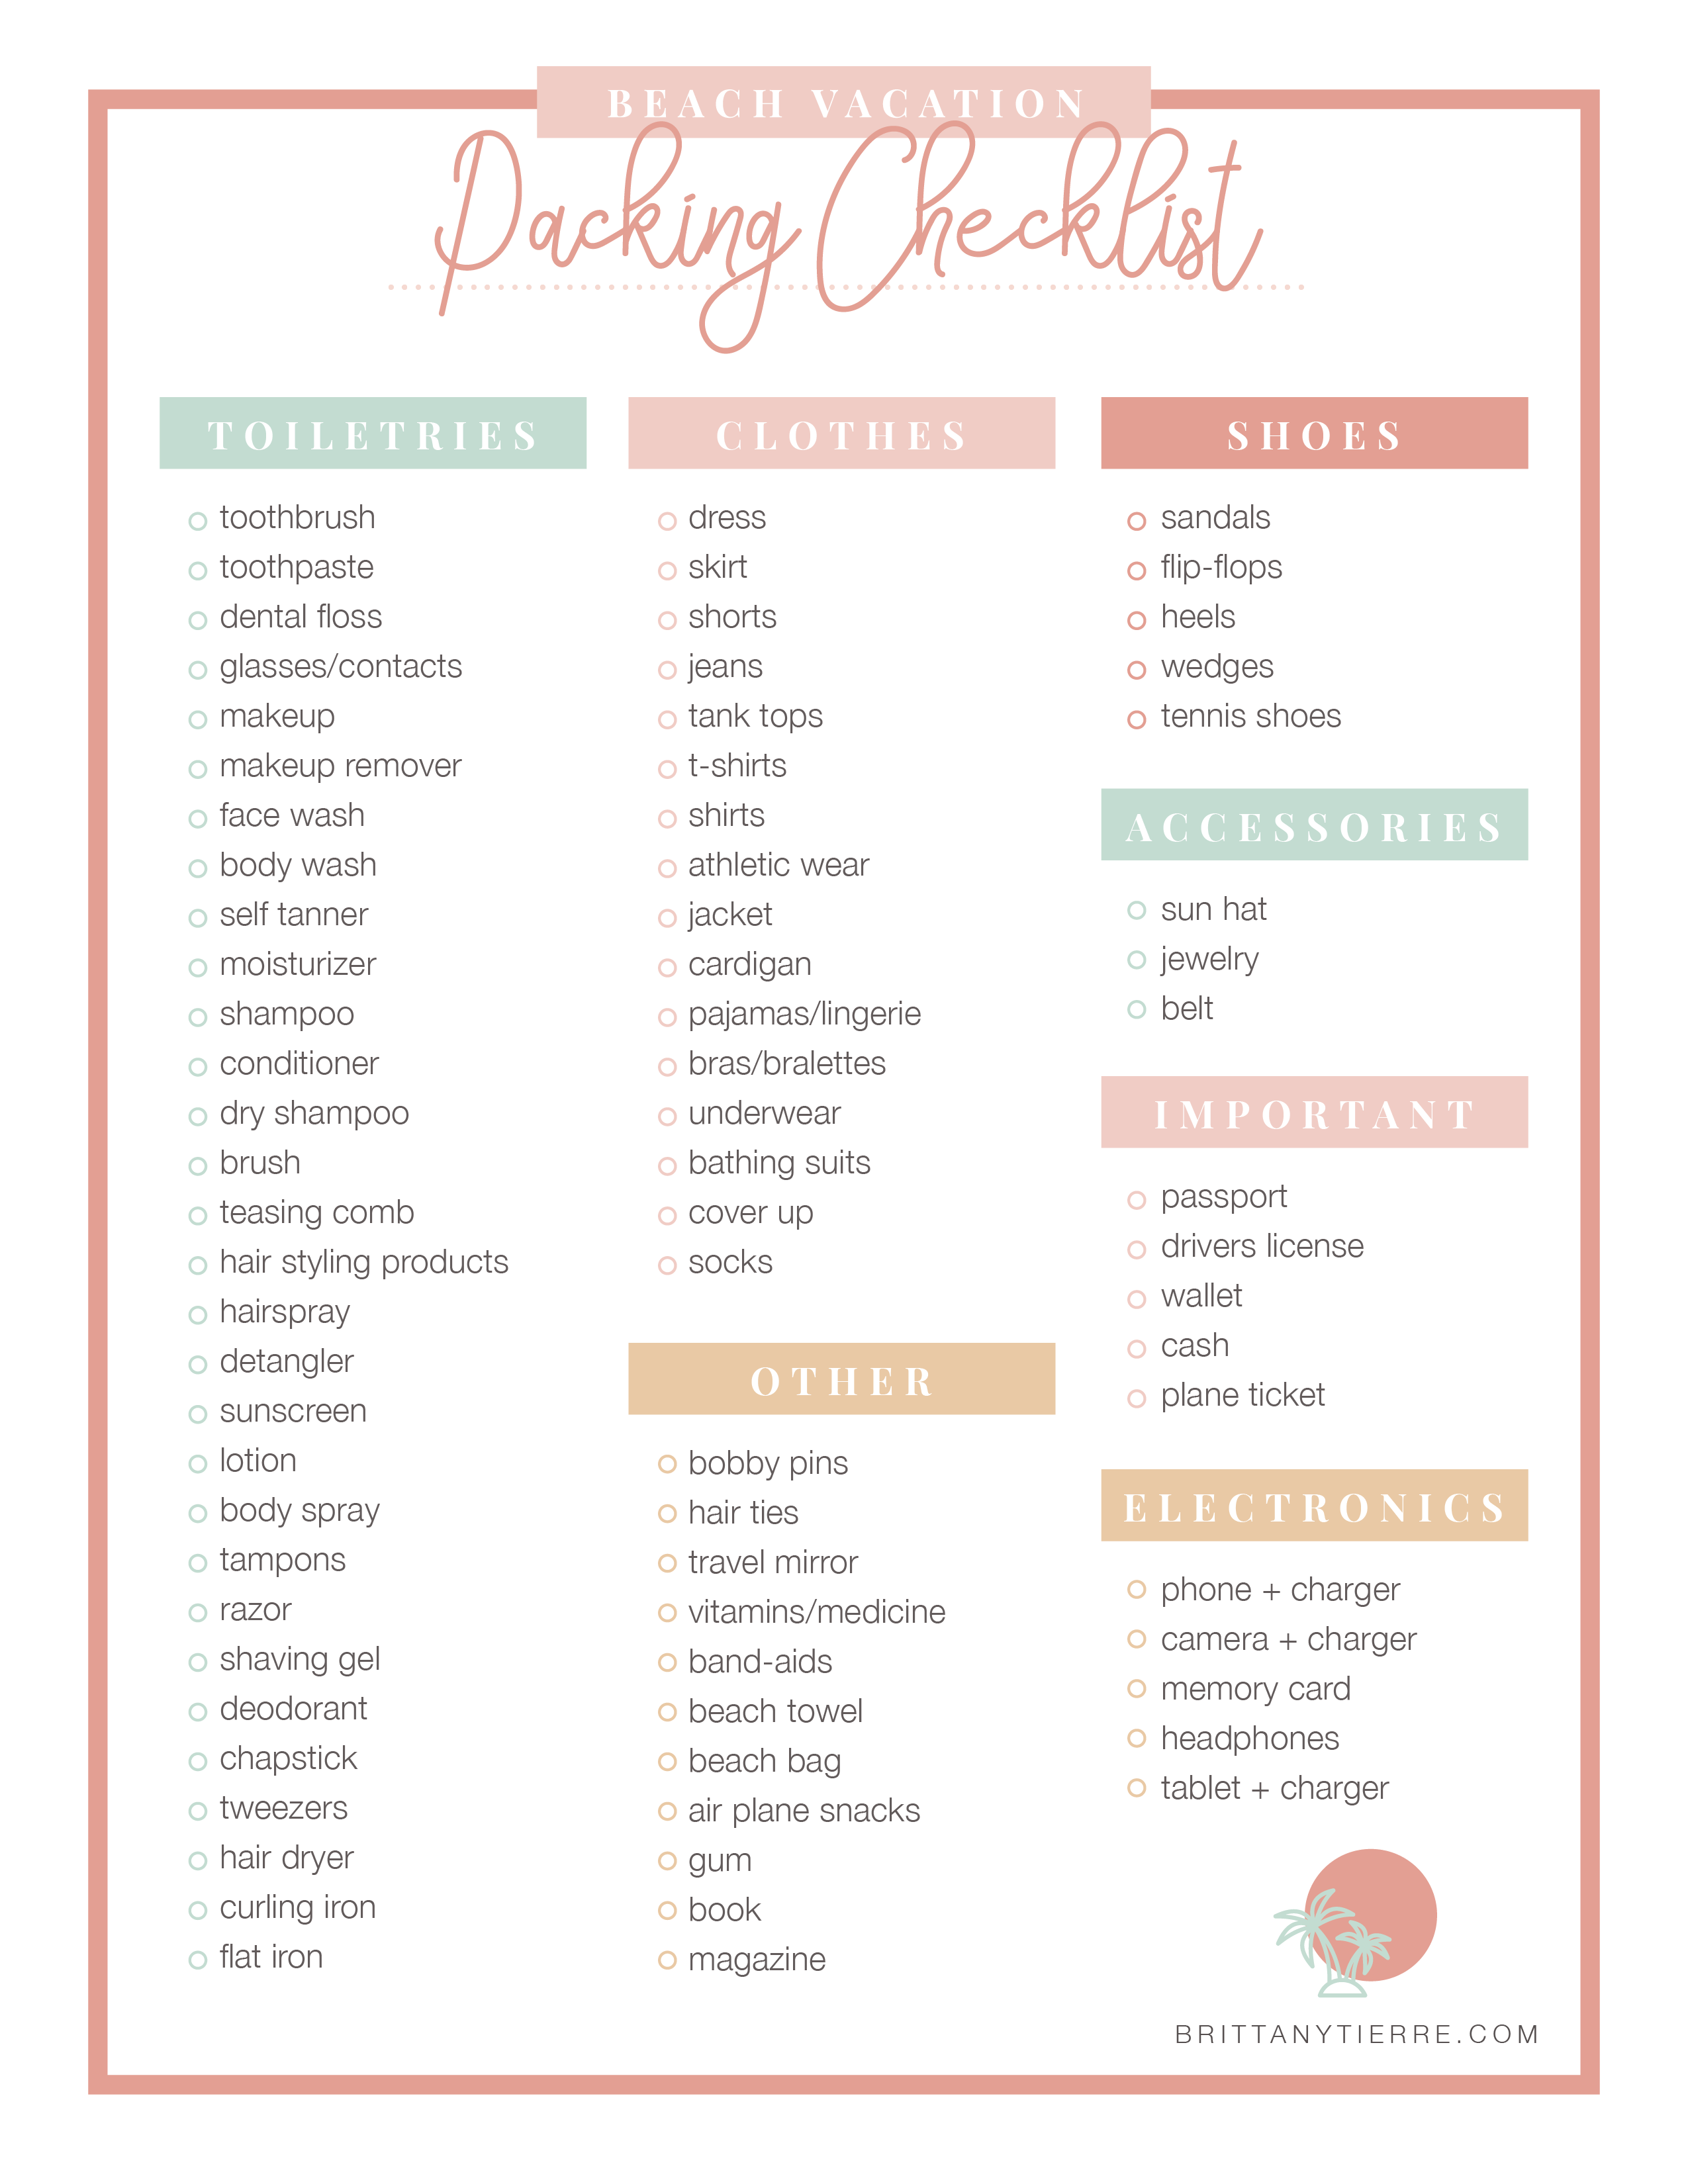 Beach Vacation Packing Checklist -   16 holiday Checklist clothes ideas